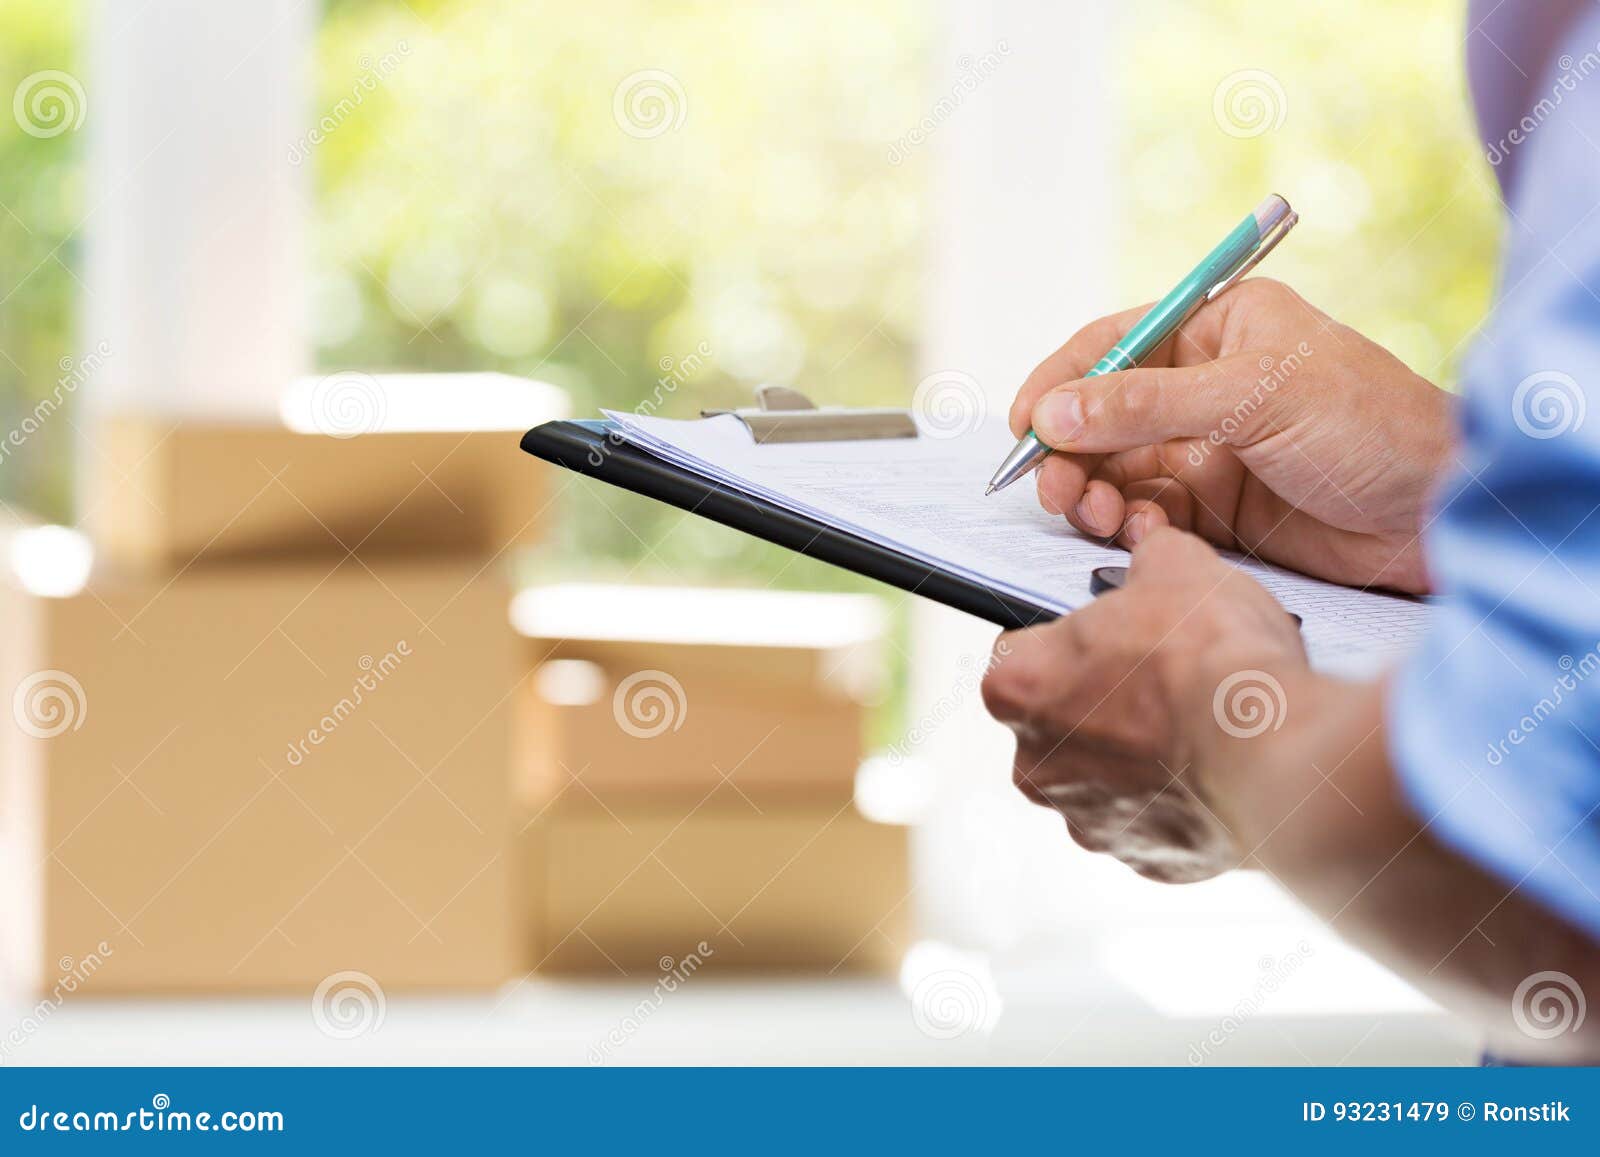 logistics - delivery service man writing documents